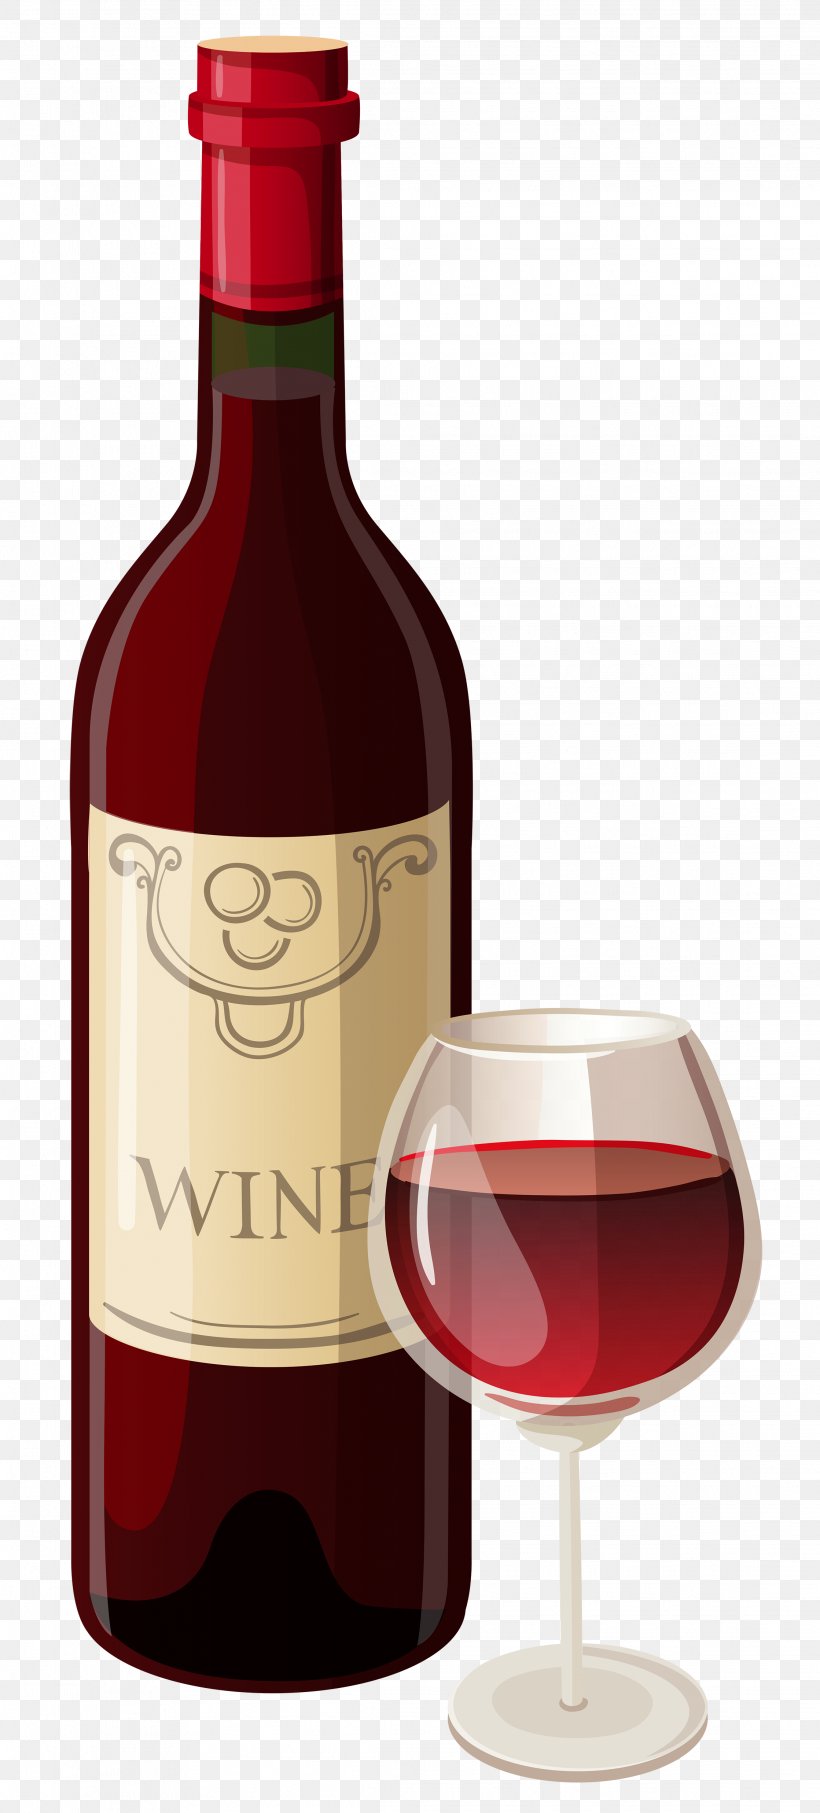 red-wine-champagne-bottle-clip-art-png-2237x4946px-red-wine-bottle